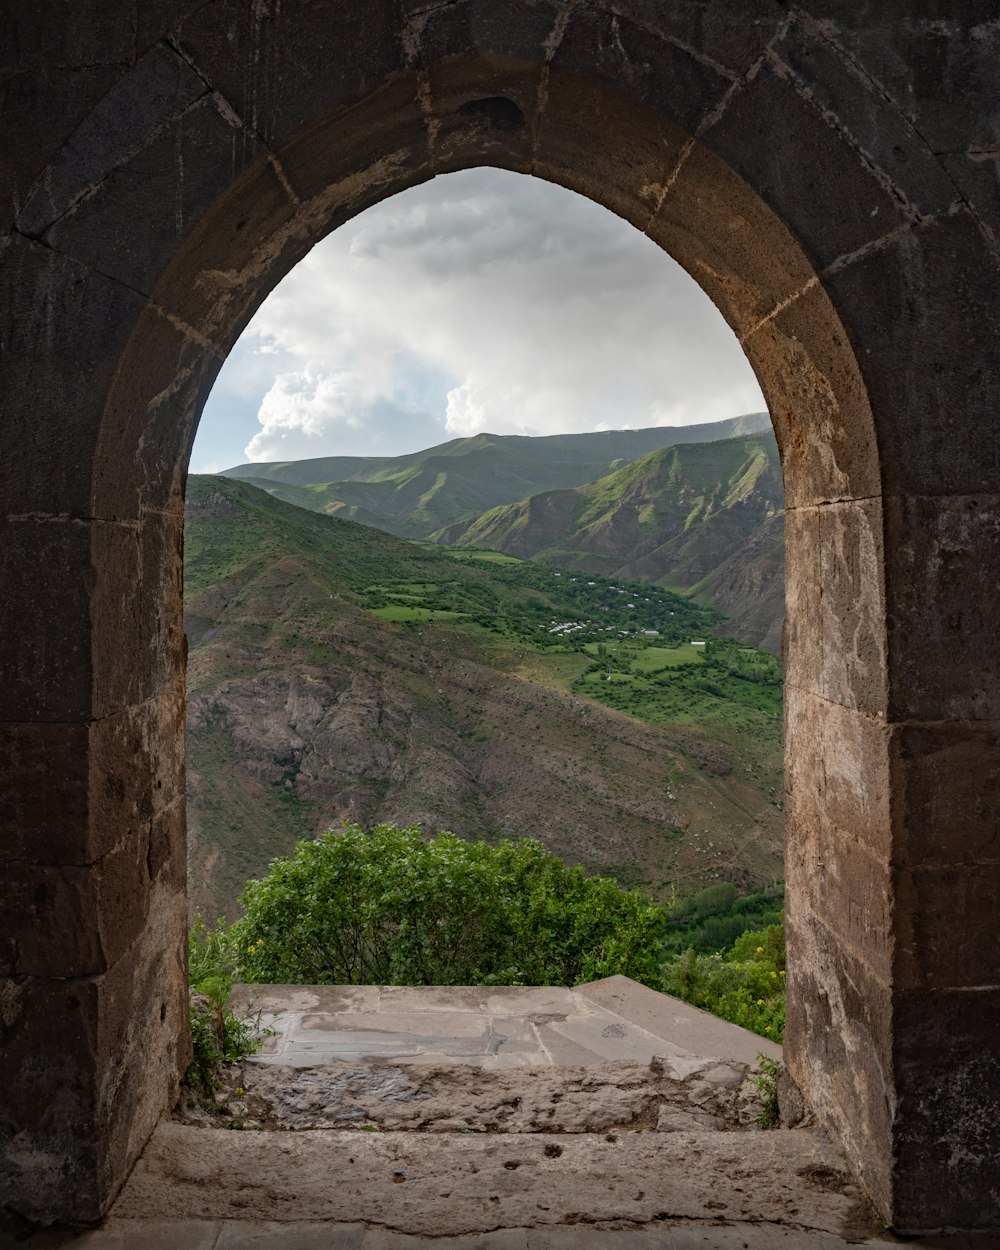 a view of a valley through a stone archway